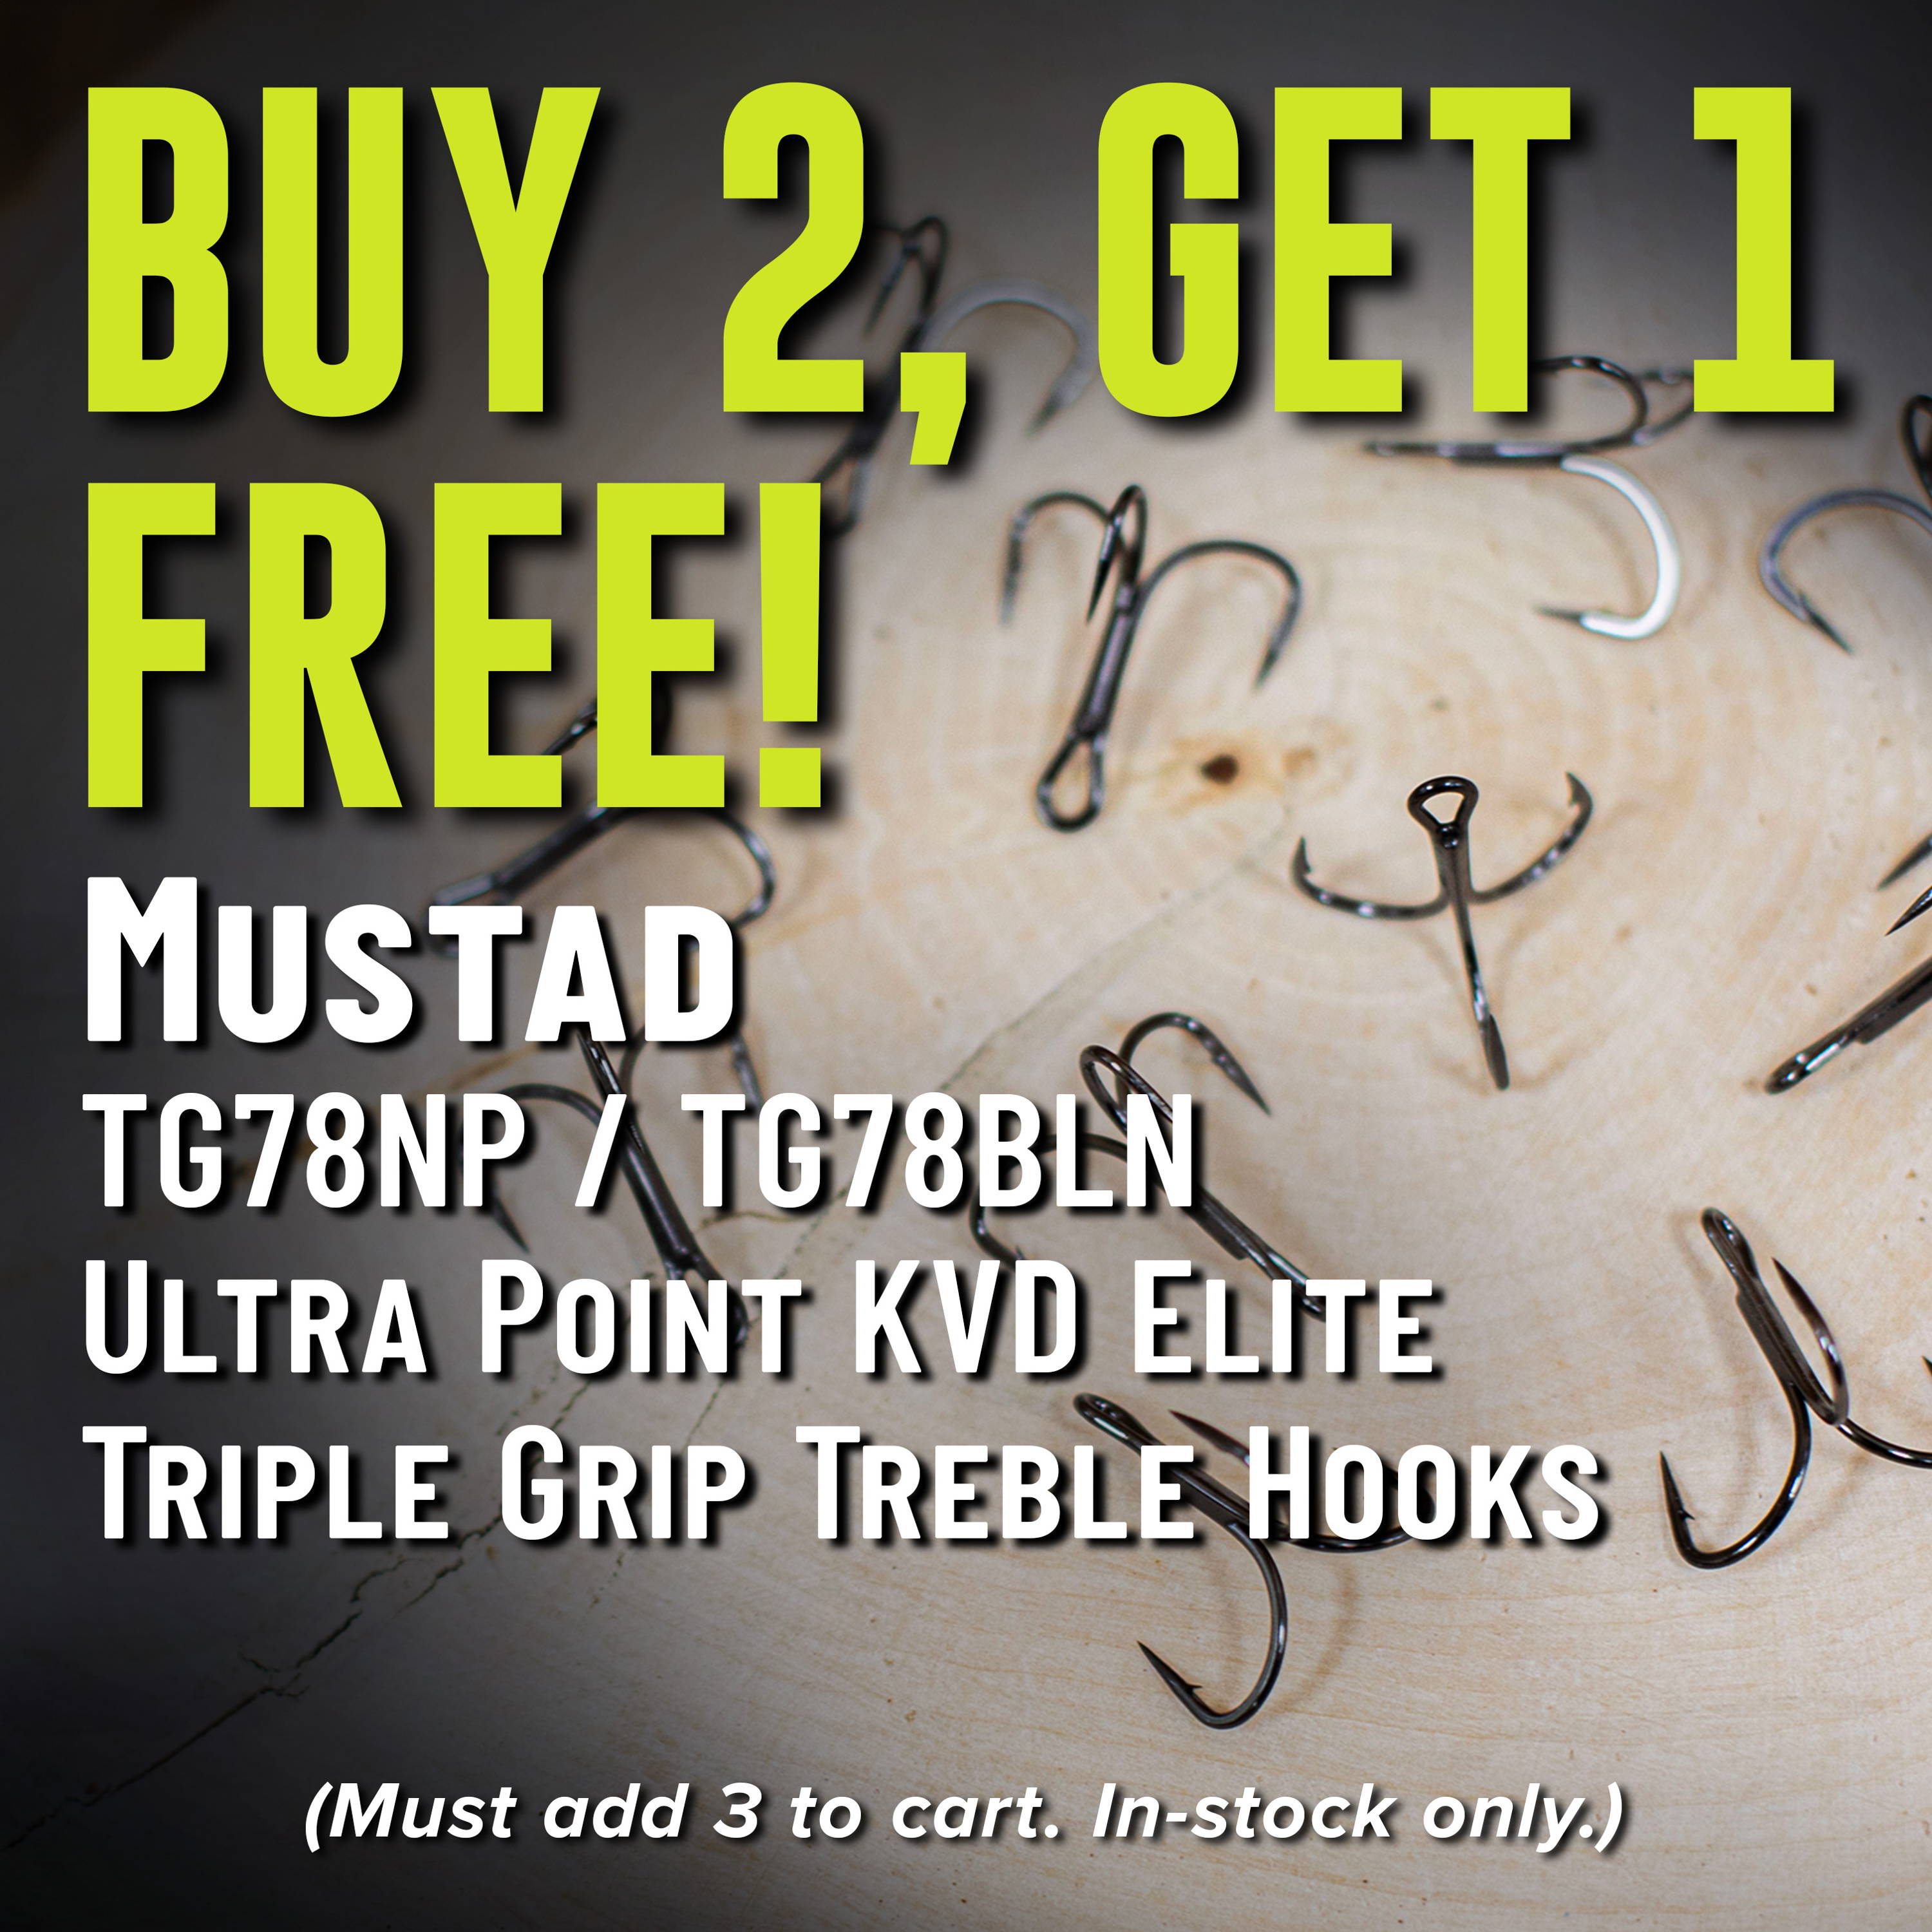 Buy 2, Get 1 Free! Mustad TG78NP / TG78BLN Ultra Point KVD Elite Triple Grip Treble Hooks (Must add 3 to cart. In-stock only.)